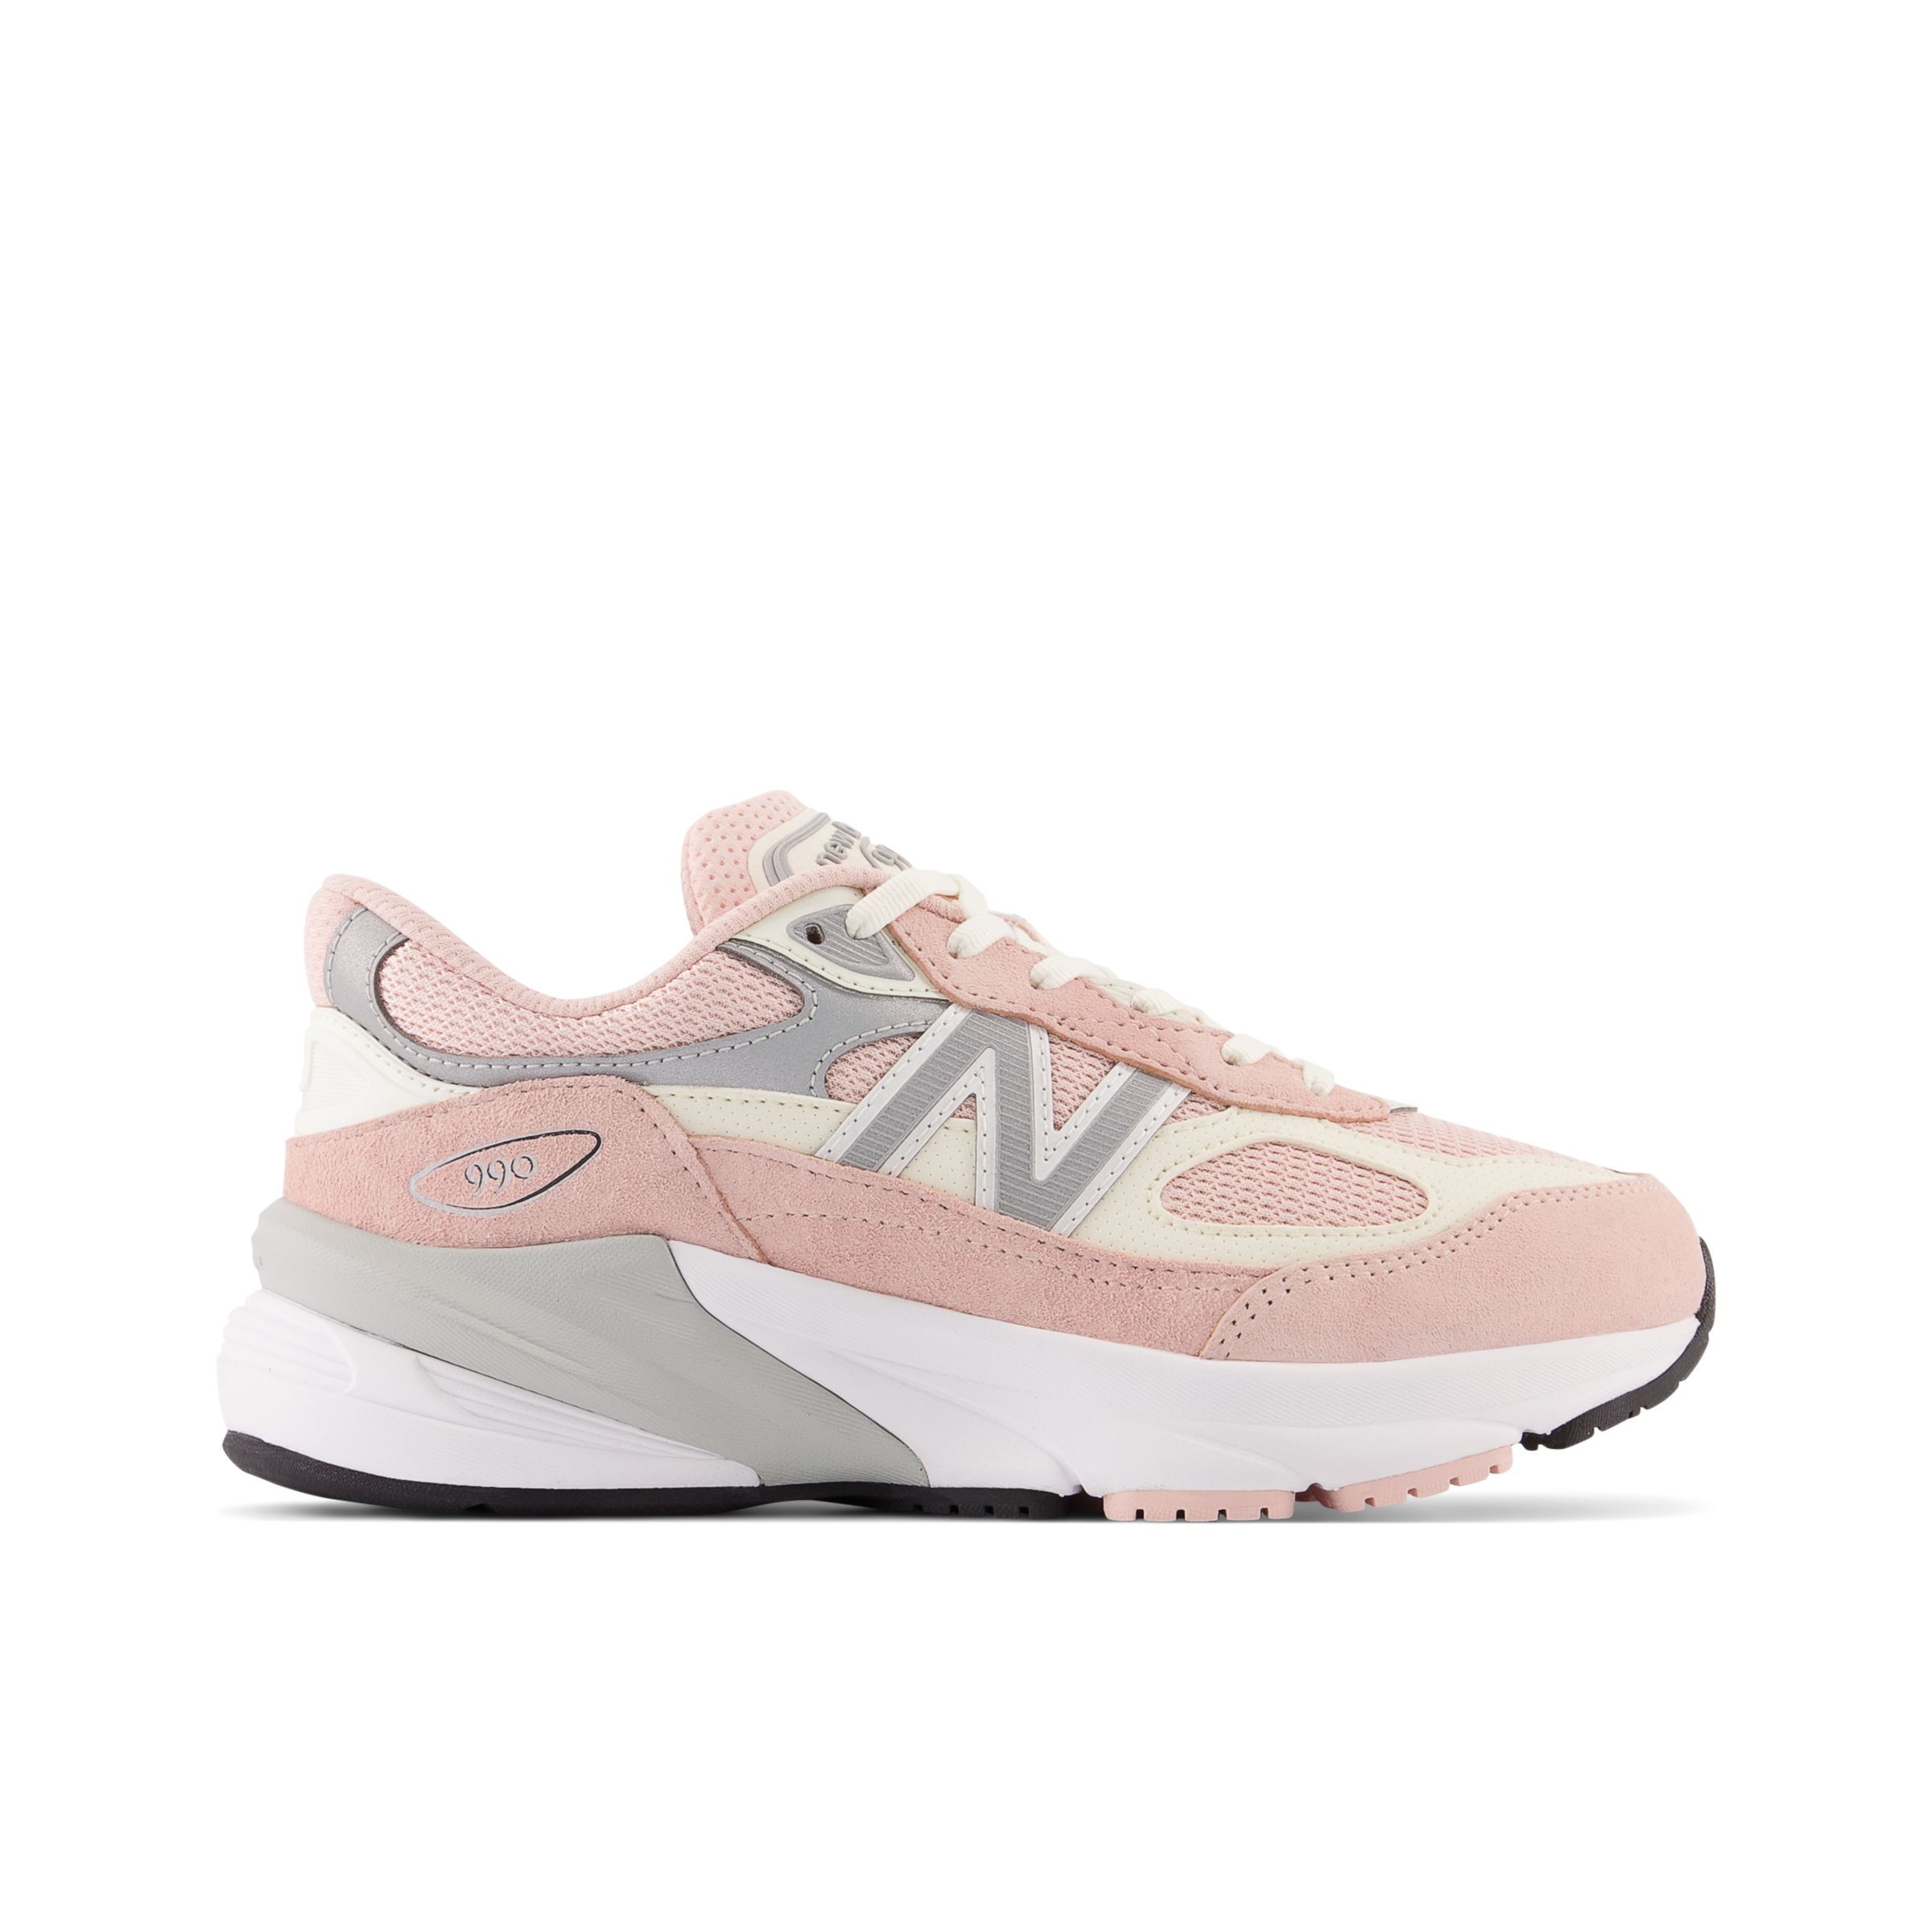 New Balance Kids' FuelCell 990v6 - Pink/White (Size 6)